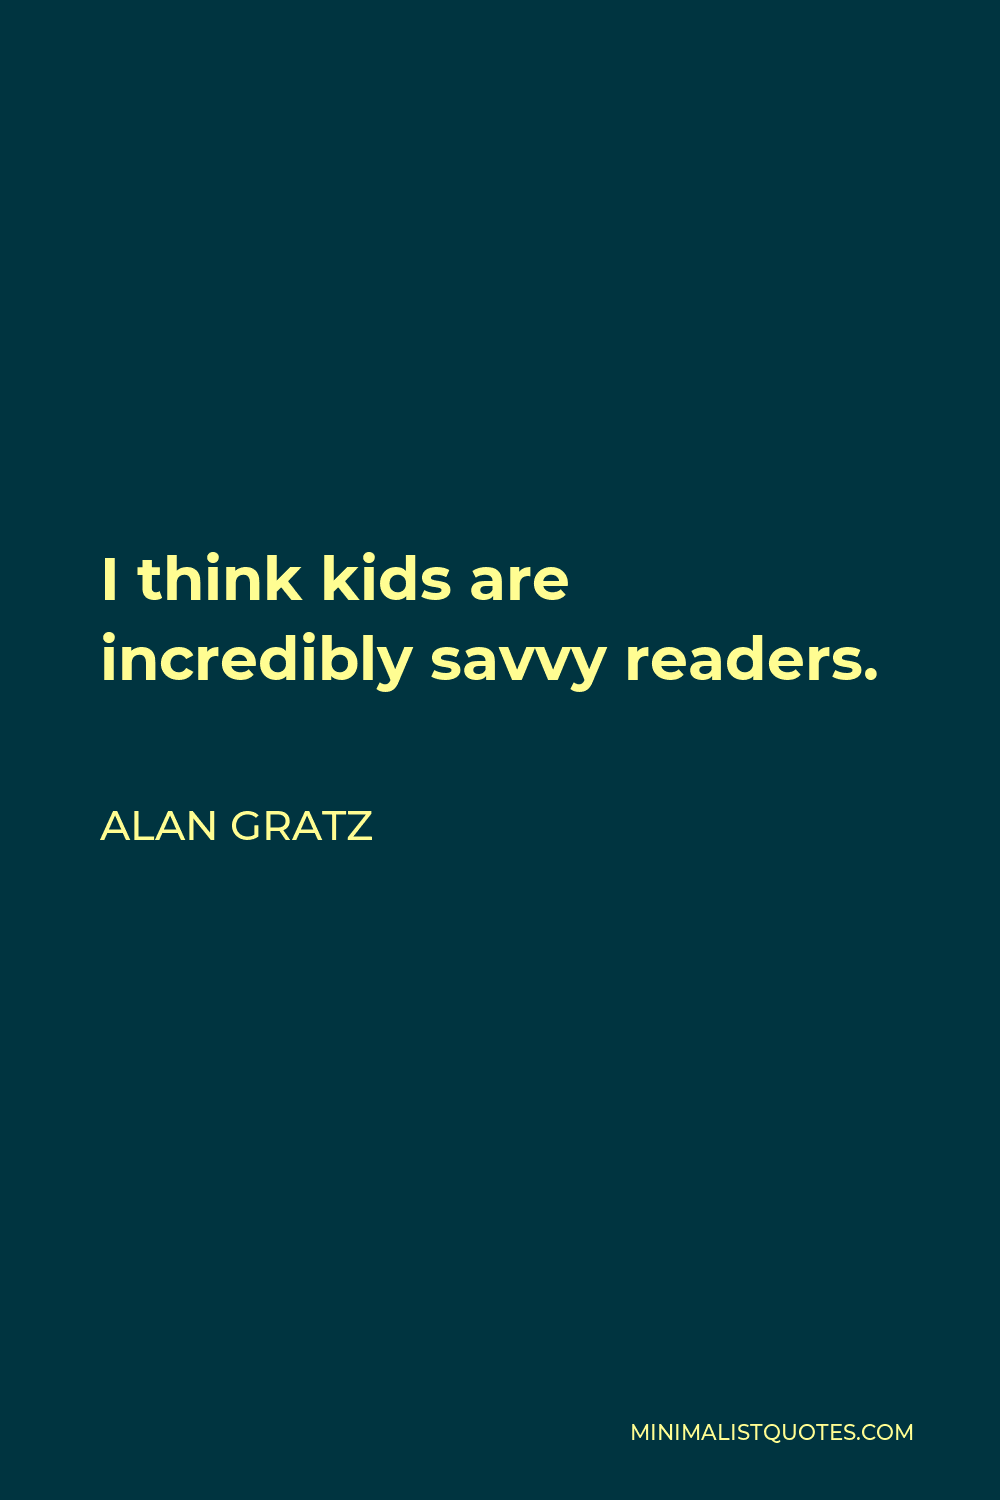 Alan Gratz Quote - I think kids are incredibly savvy readers.